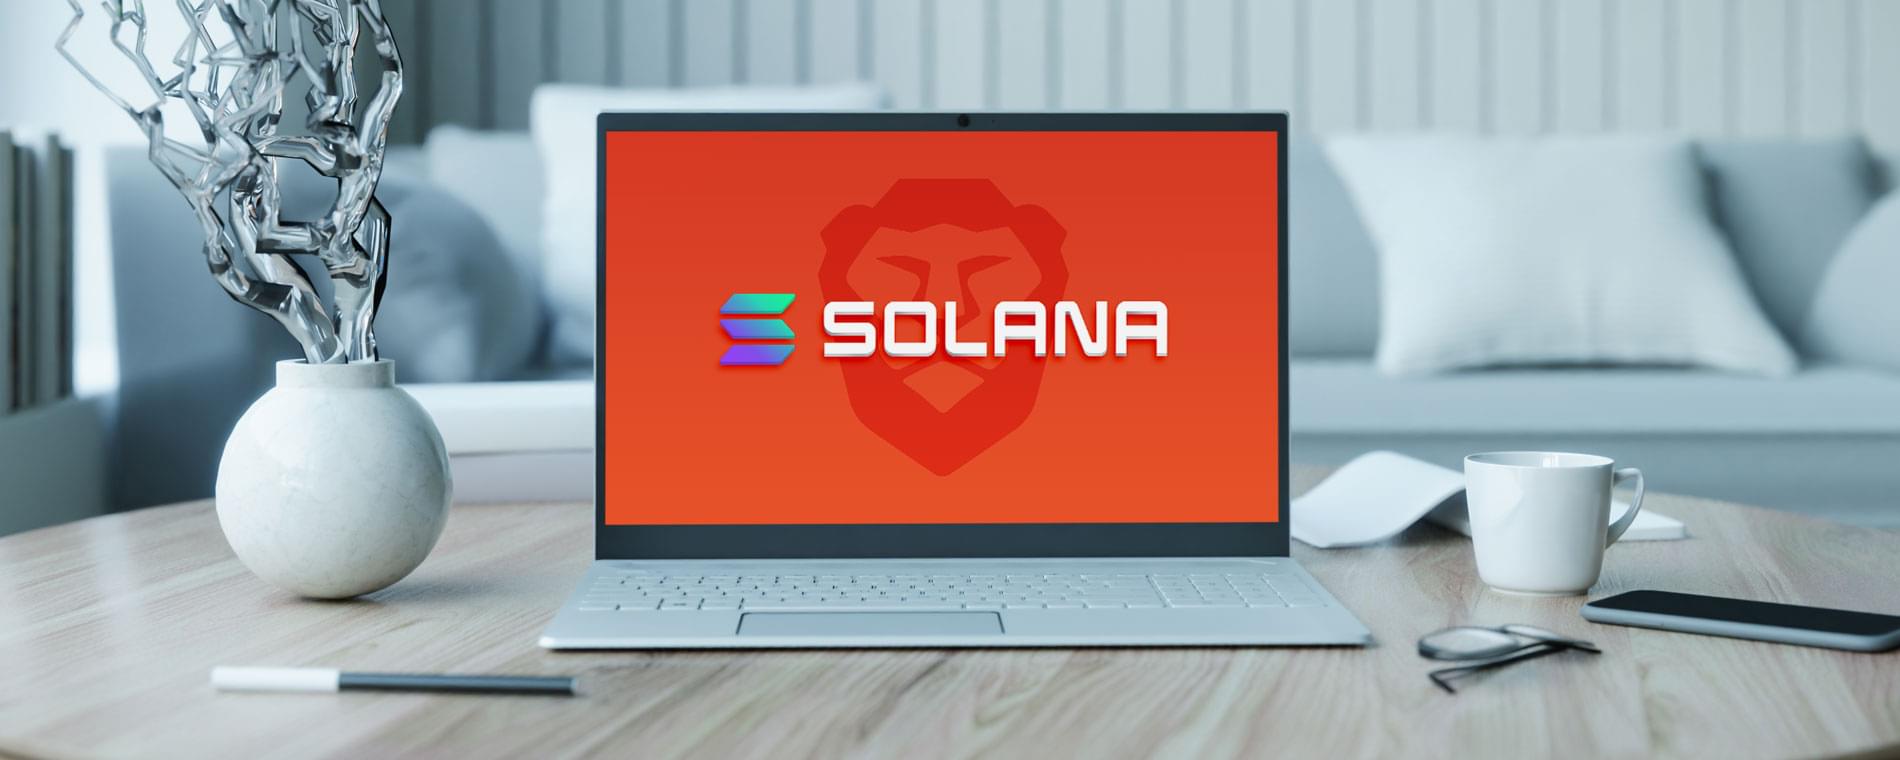 Latest Brave browser update adds Solana support